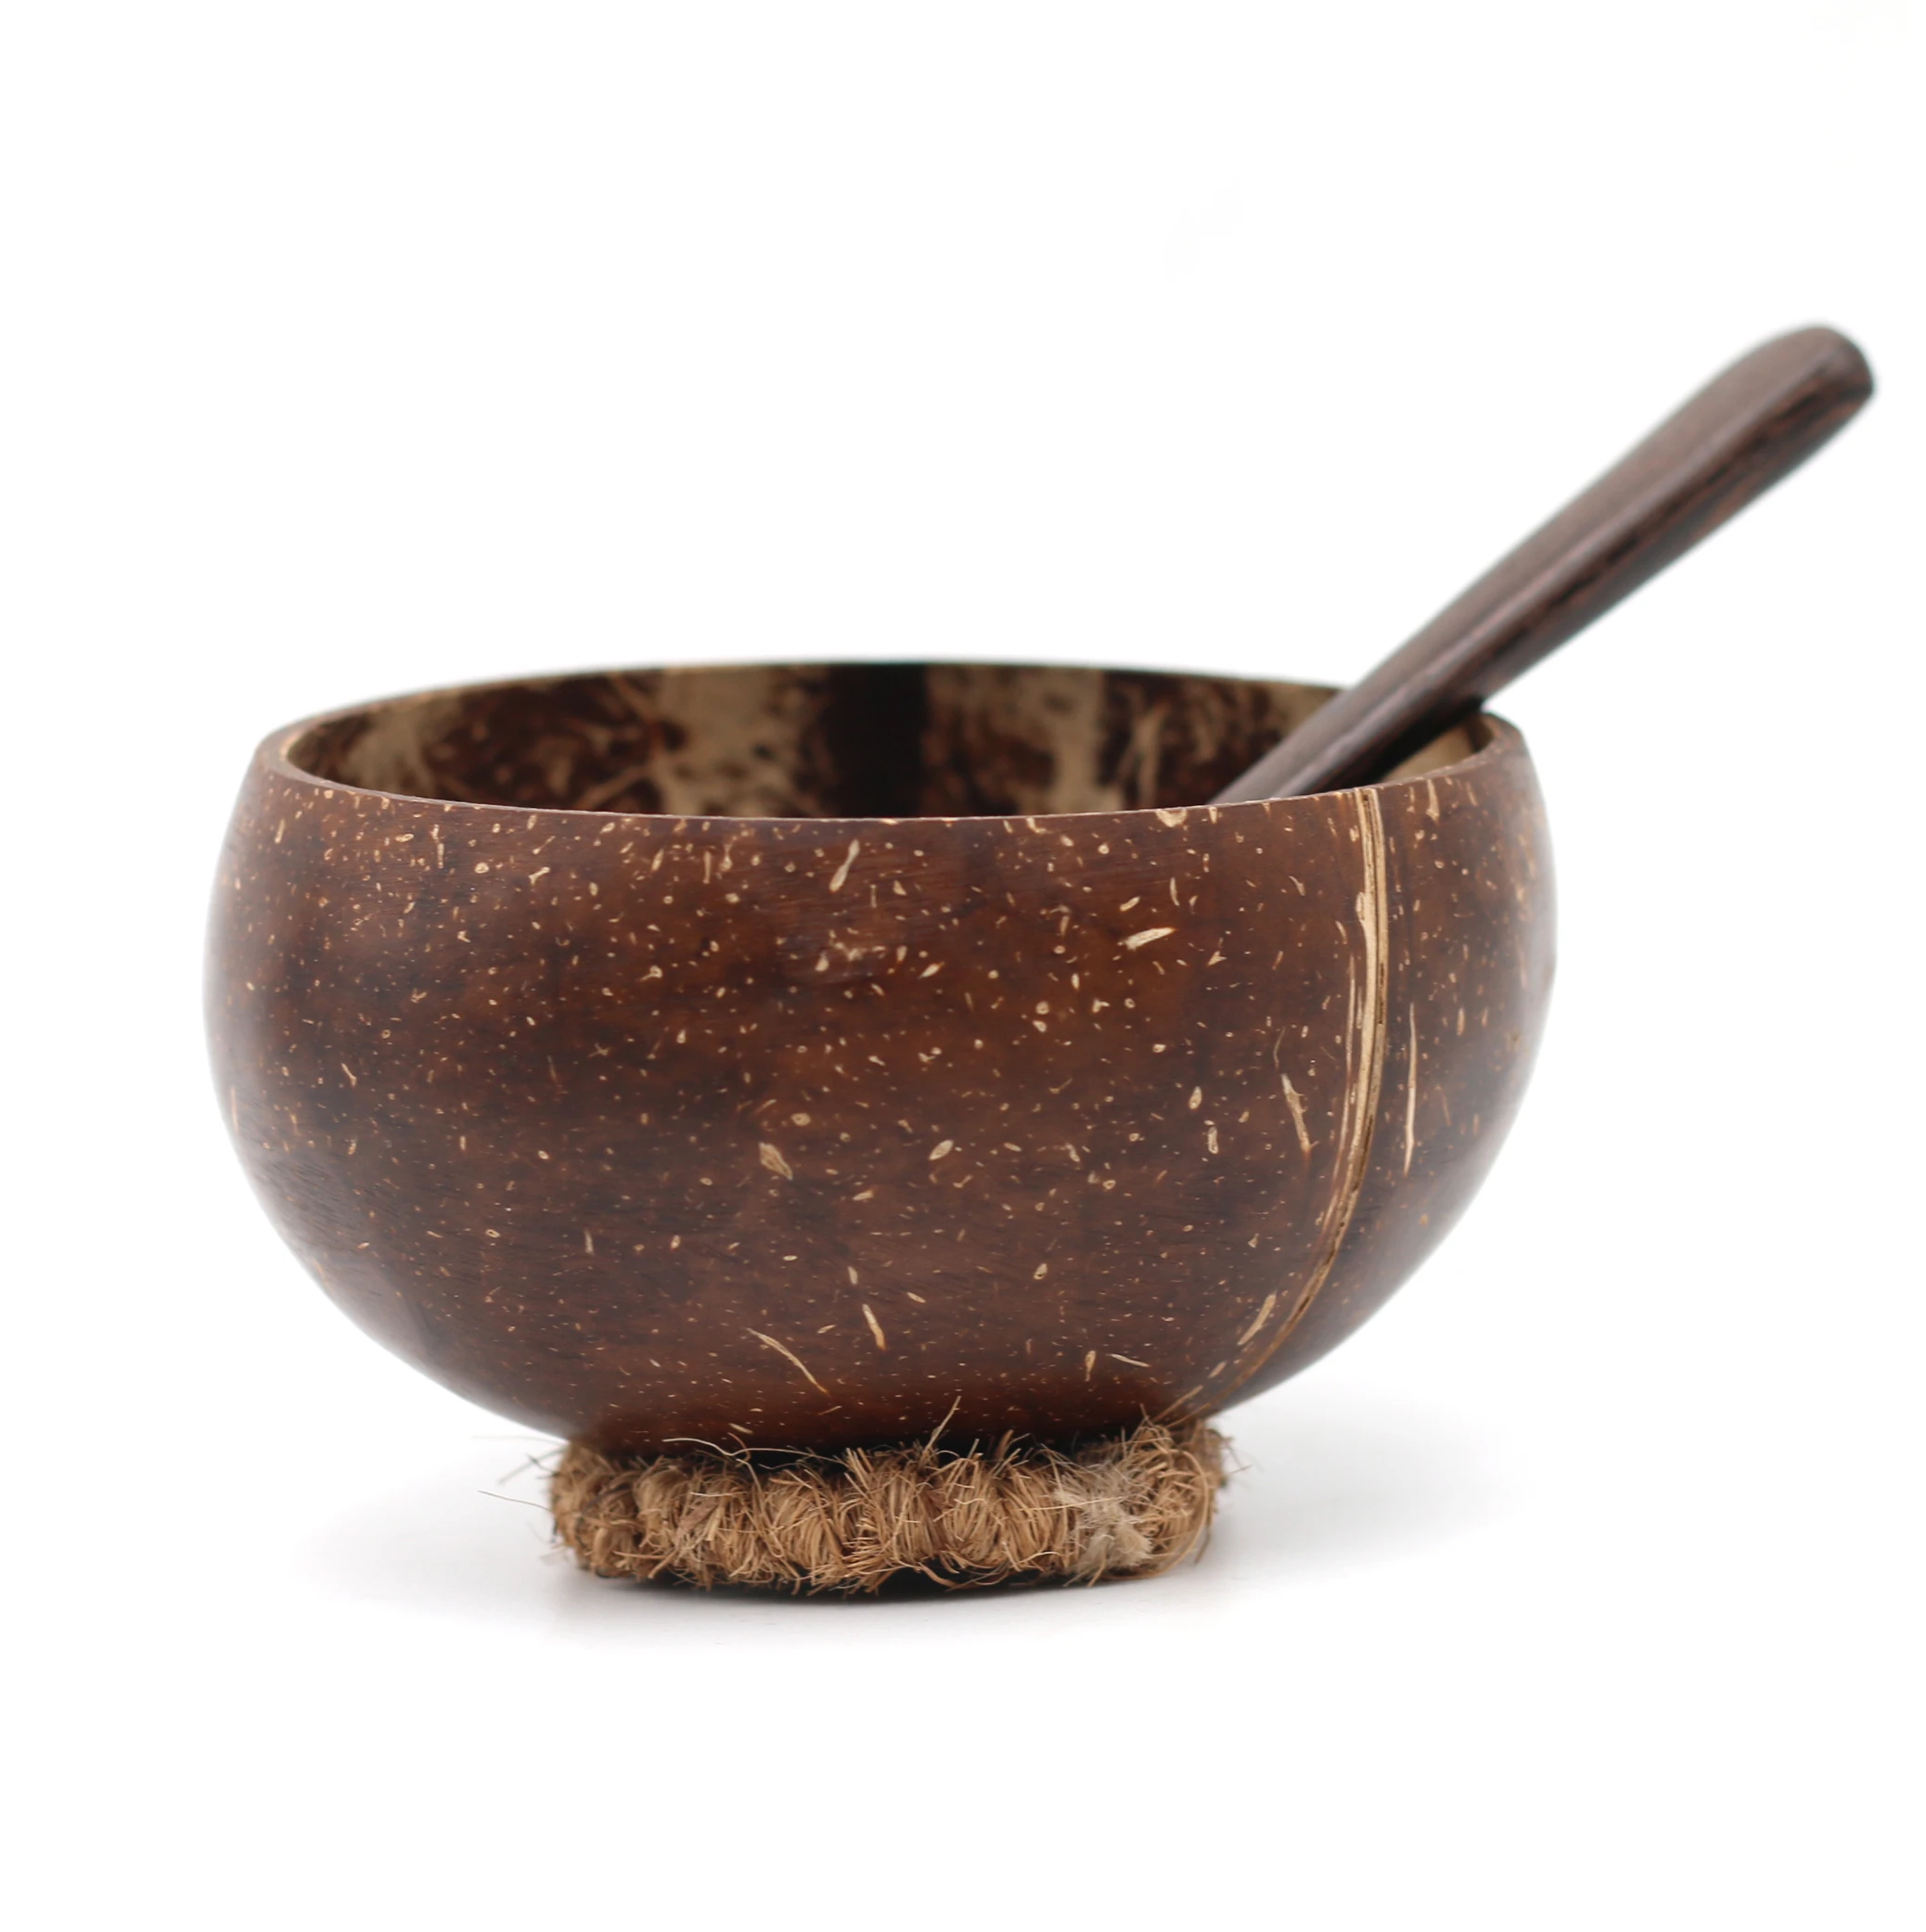 Unbreakable wooden lacquer shell set india smoothie bowl and spoon coconut bowls candle holder vietnam